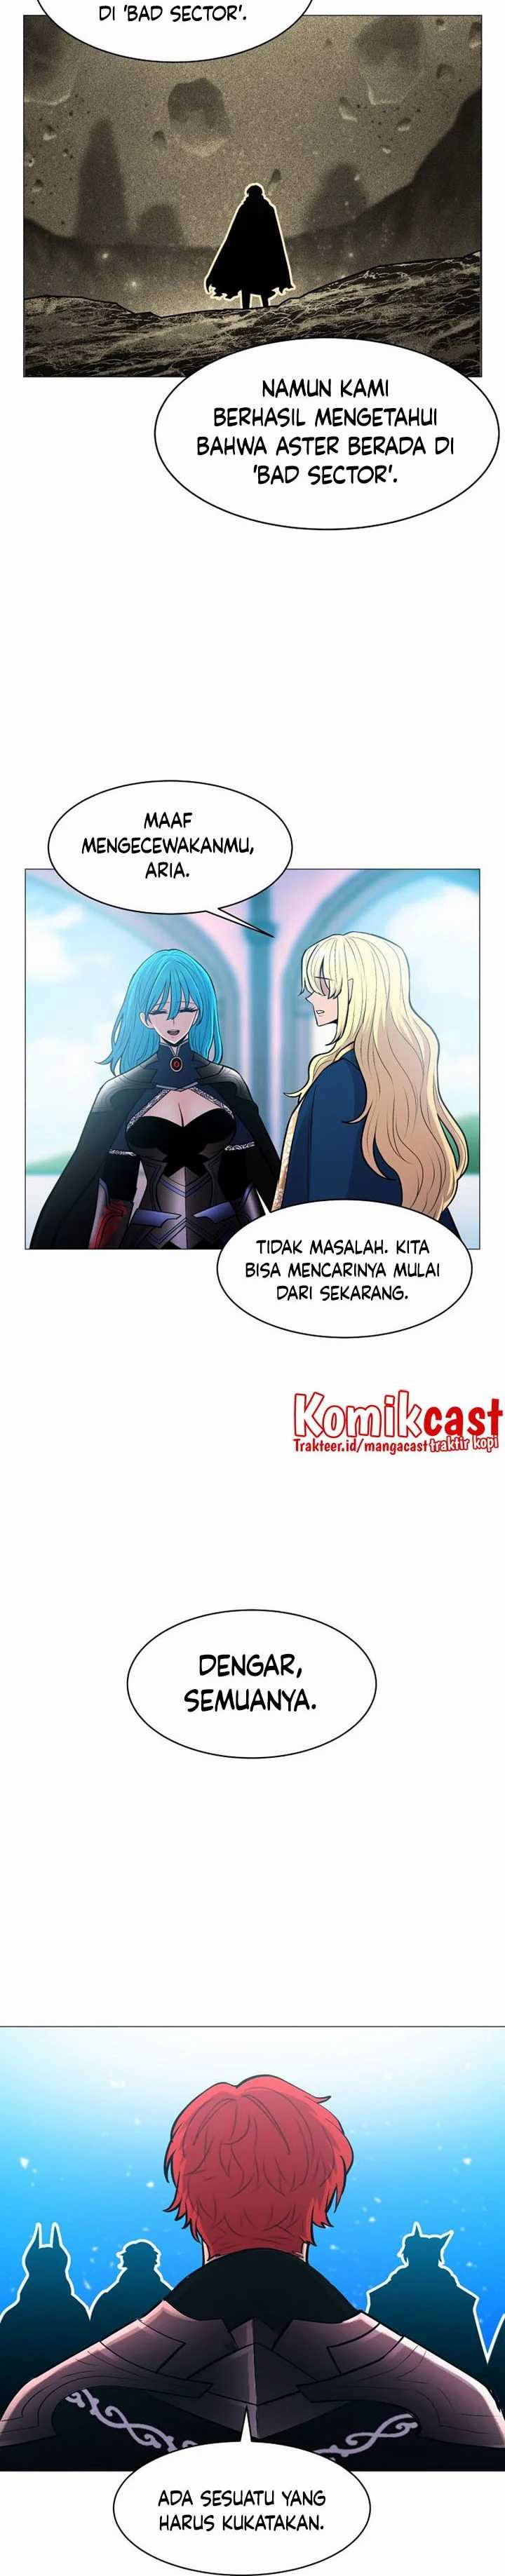 Updater Chapter 85